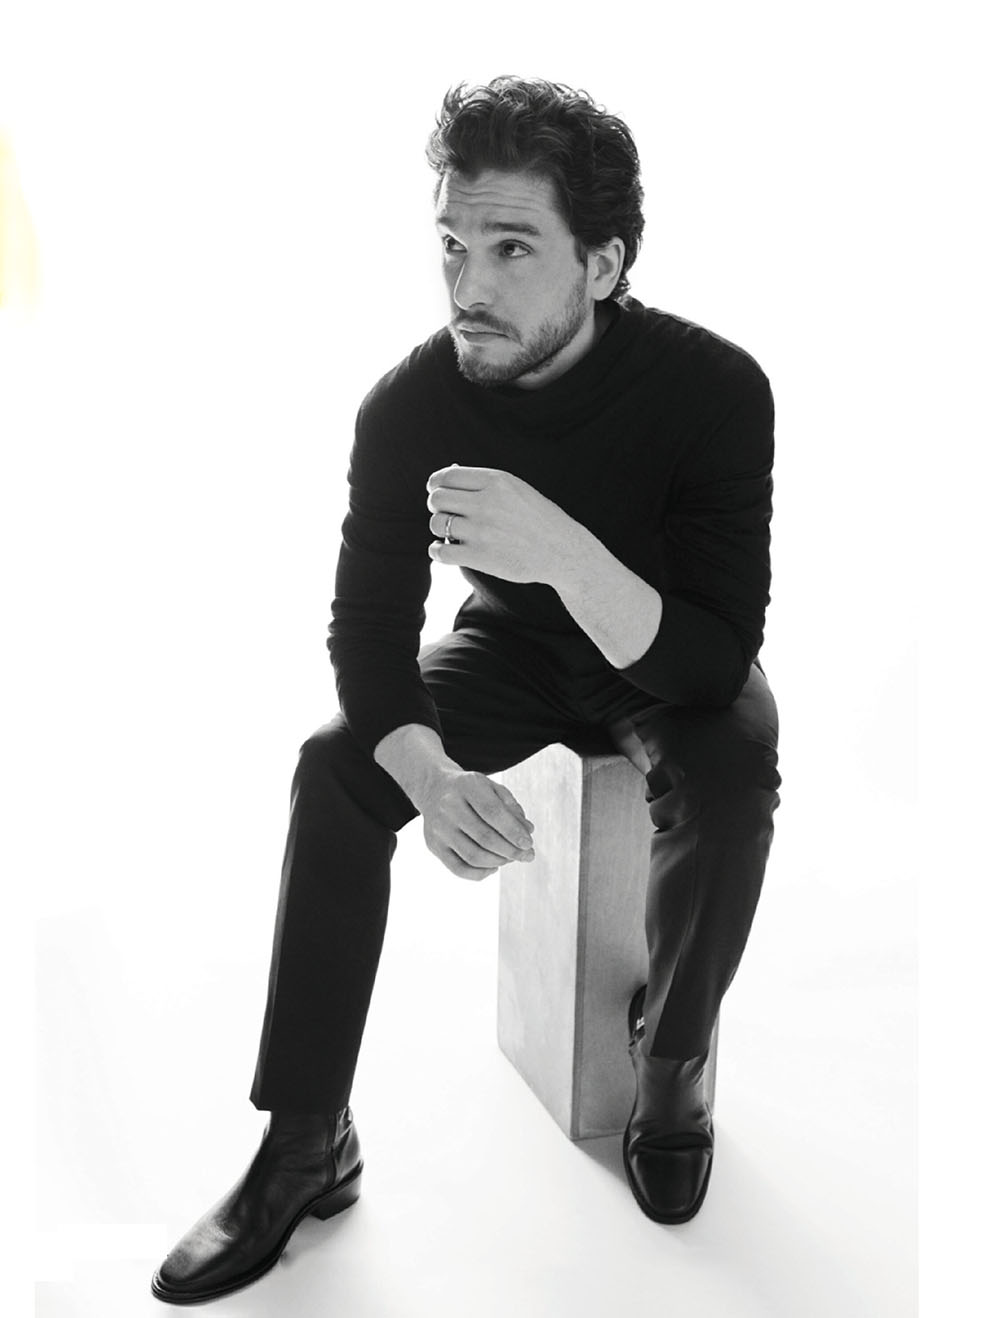 Kit Harington covers Esquire UK May 2019 by Alexi Lubomirski